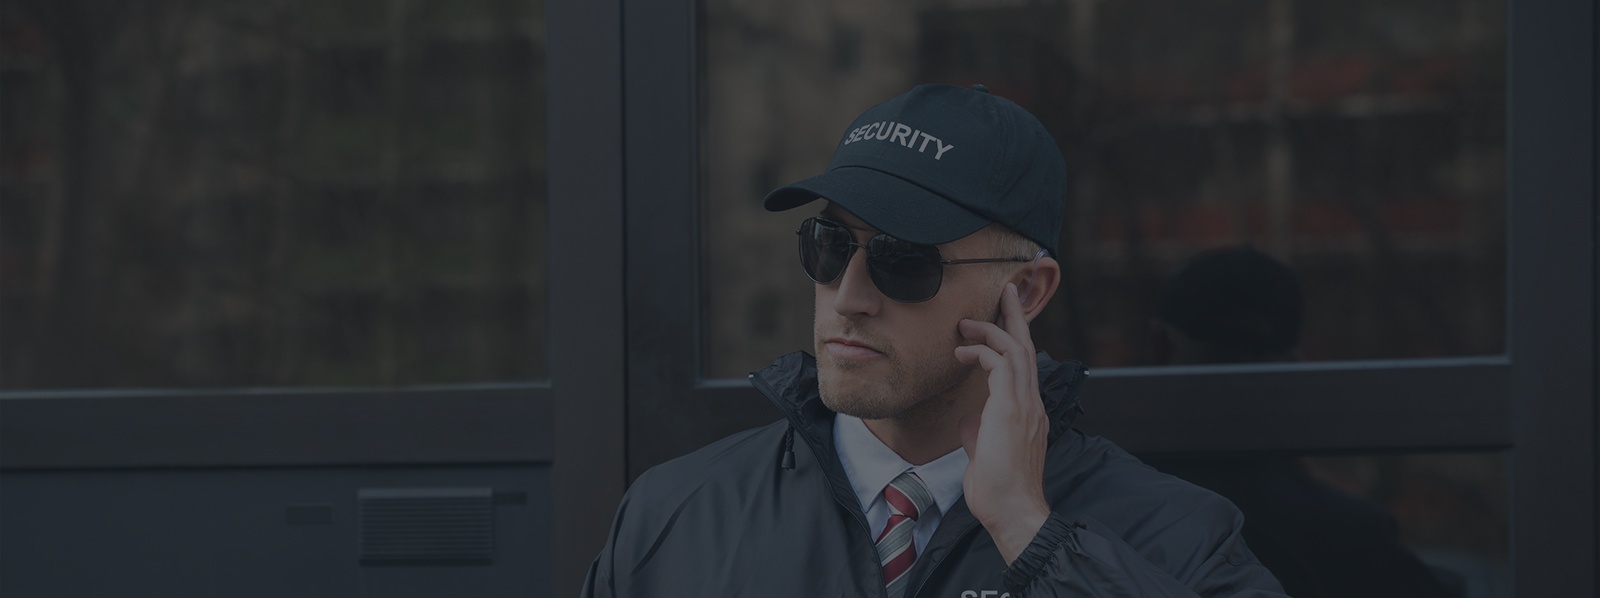 Doorman Security Guard Services Roswell Georgia